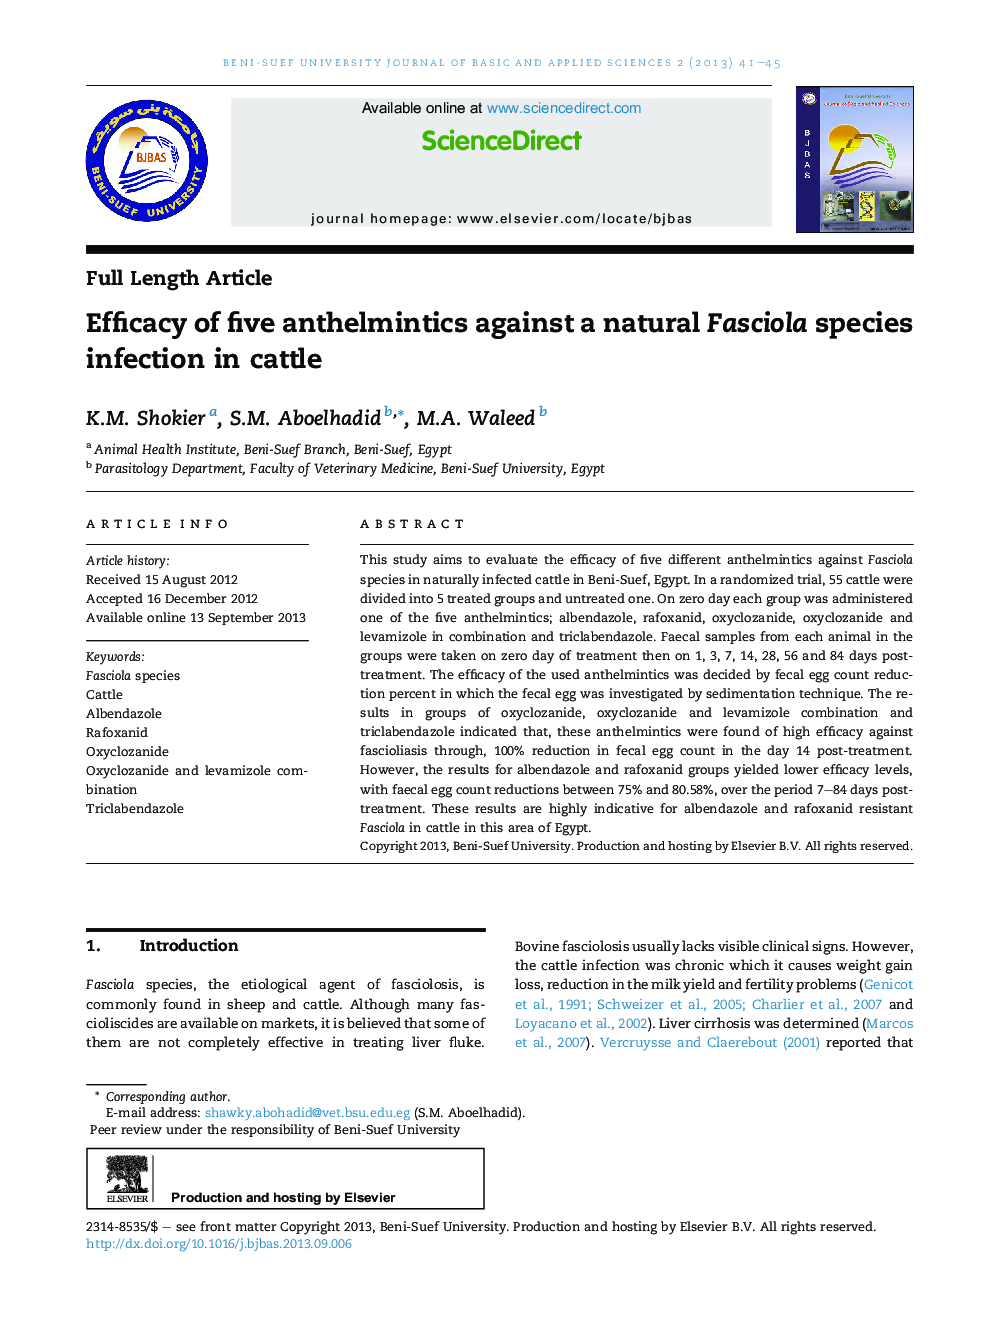 Efficacy of five anthelmintics against a natural Fasciola species infection in cattle 